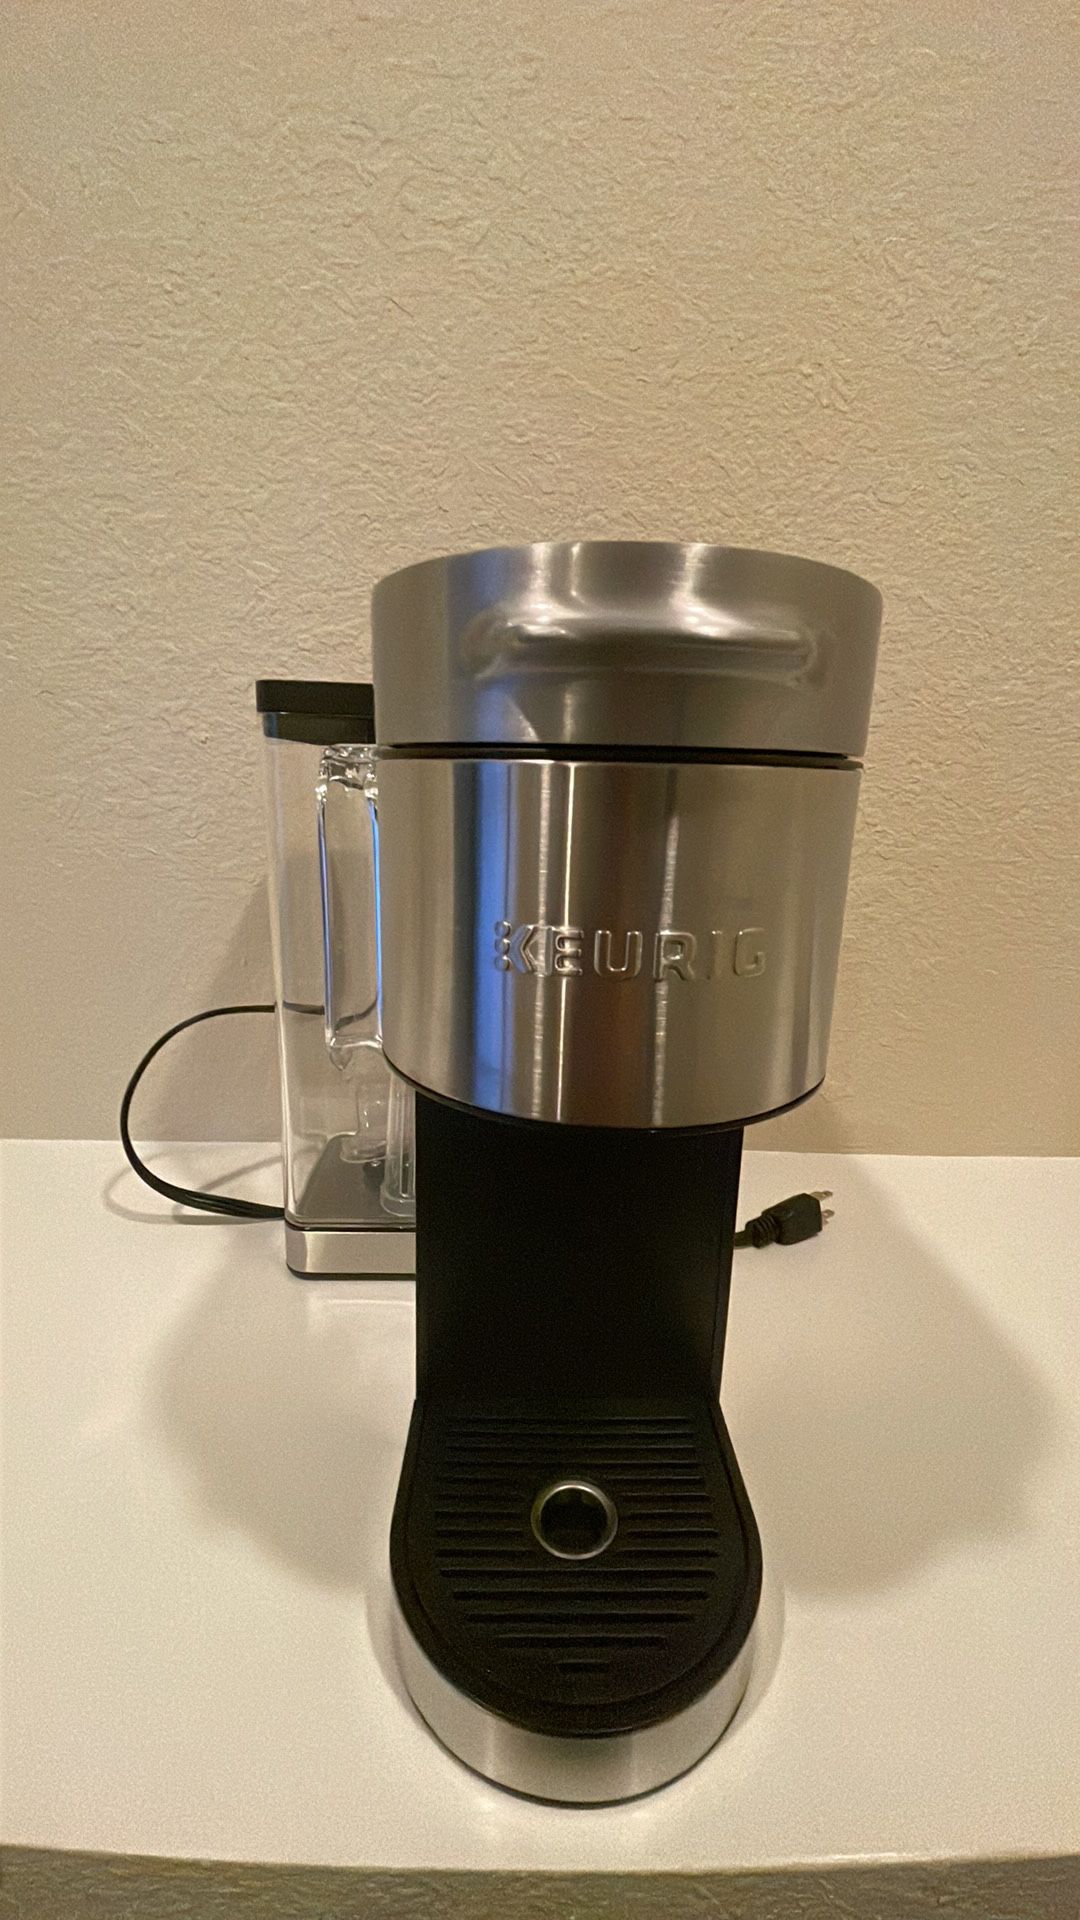 Coleman PROPANE Coffee MAKER for Sale in Knoxville, TN - OfferUp